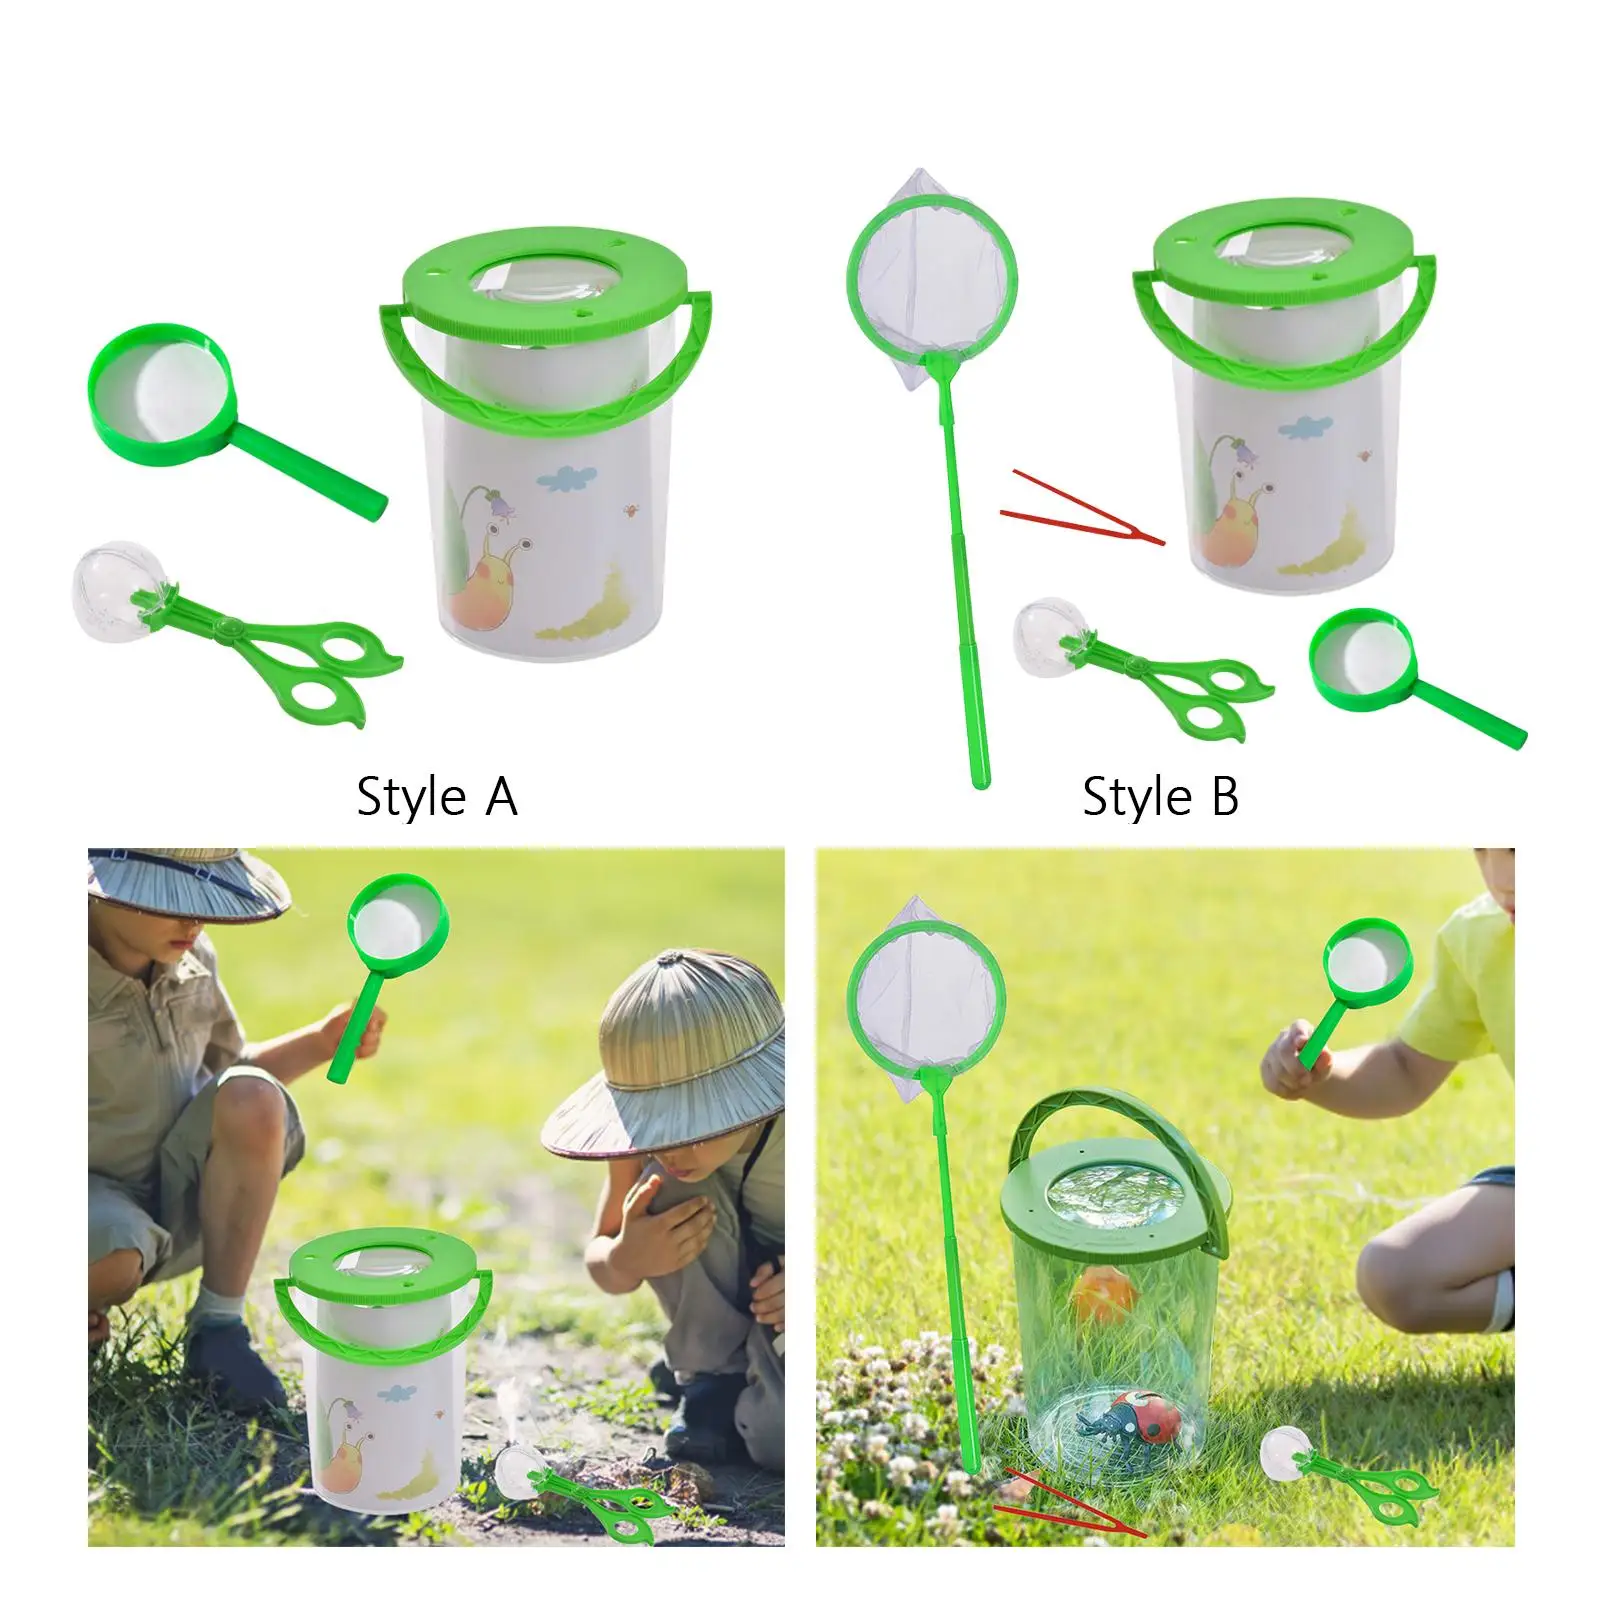 Insect Catcher Kit Explorer Insect Observation Container for Kids 8 Boys and Girls Camping Adventure